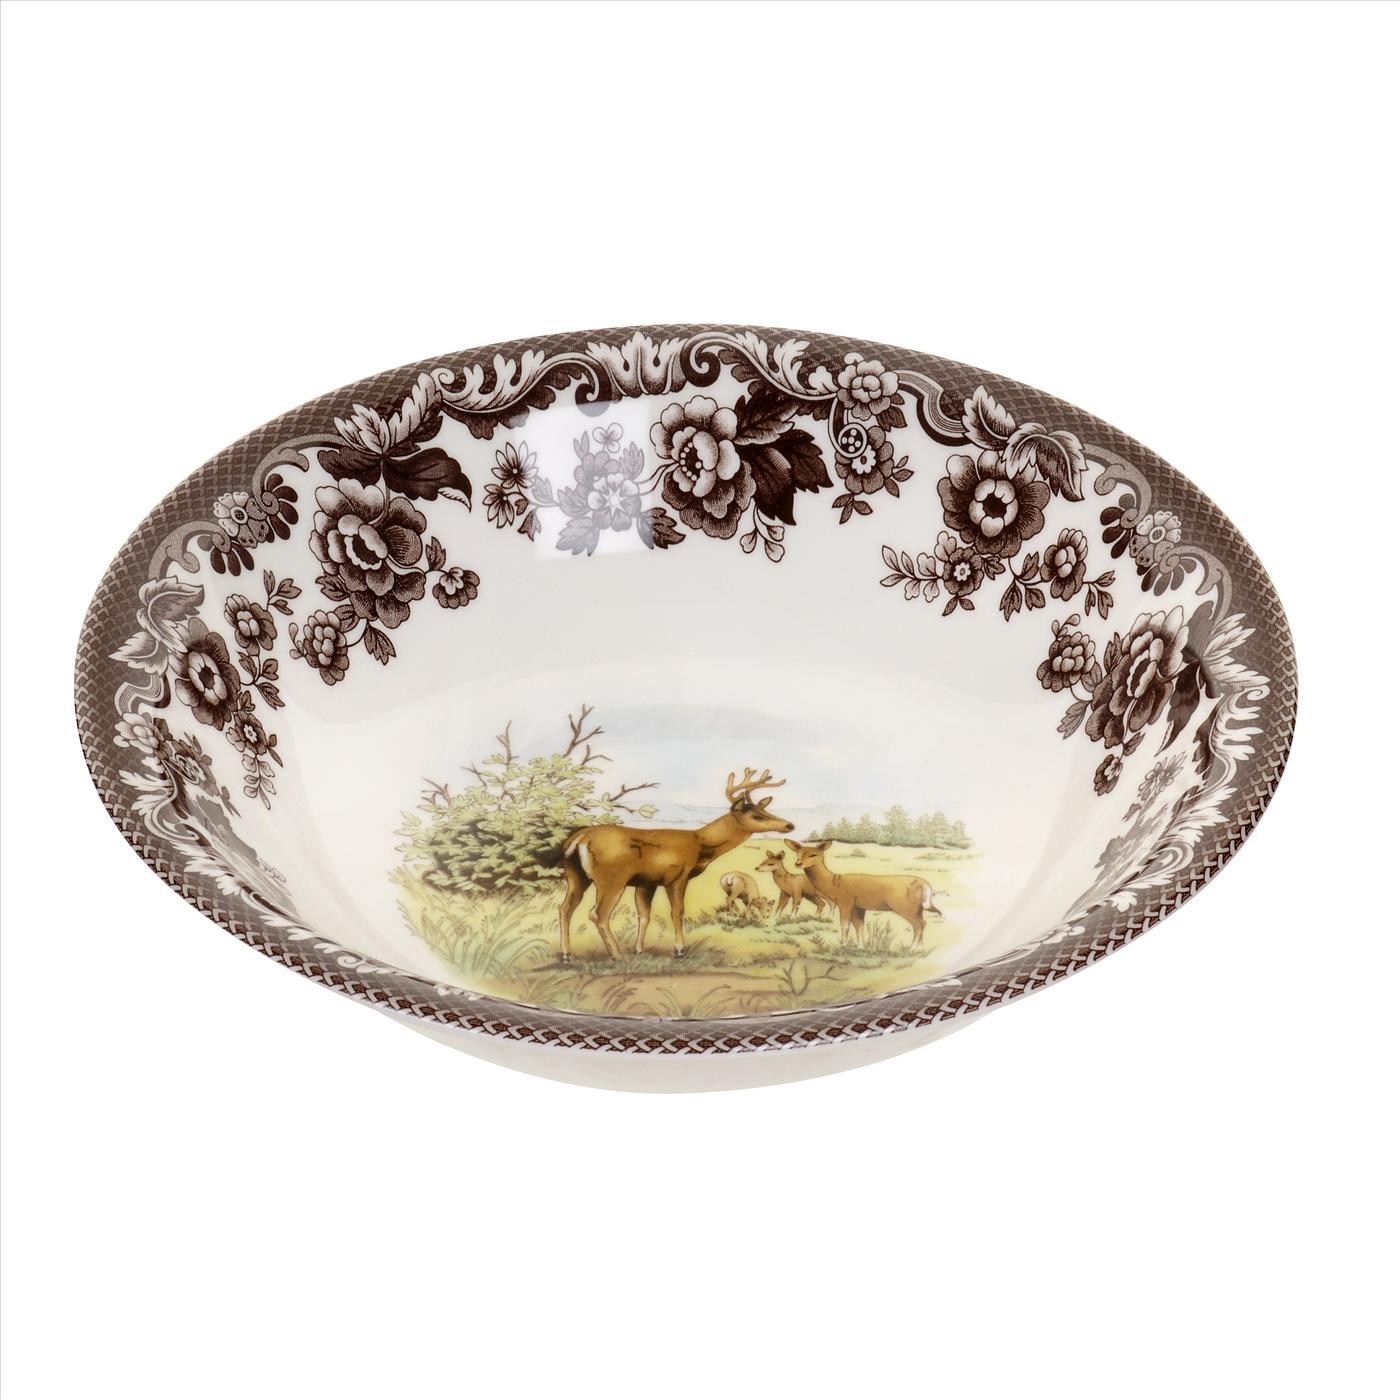 Woodland Ascot Cereal Bowl 8 Inch, Mule Deer image number null